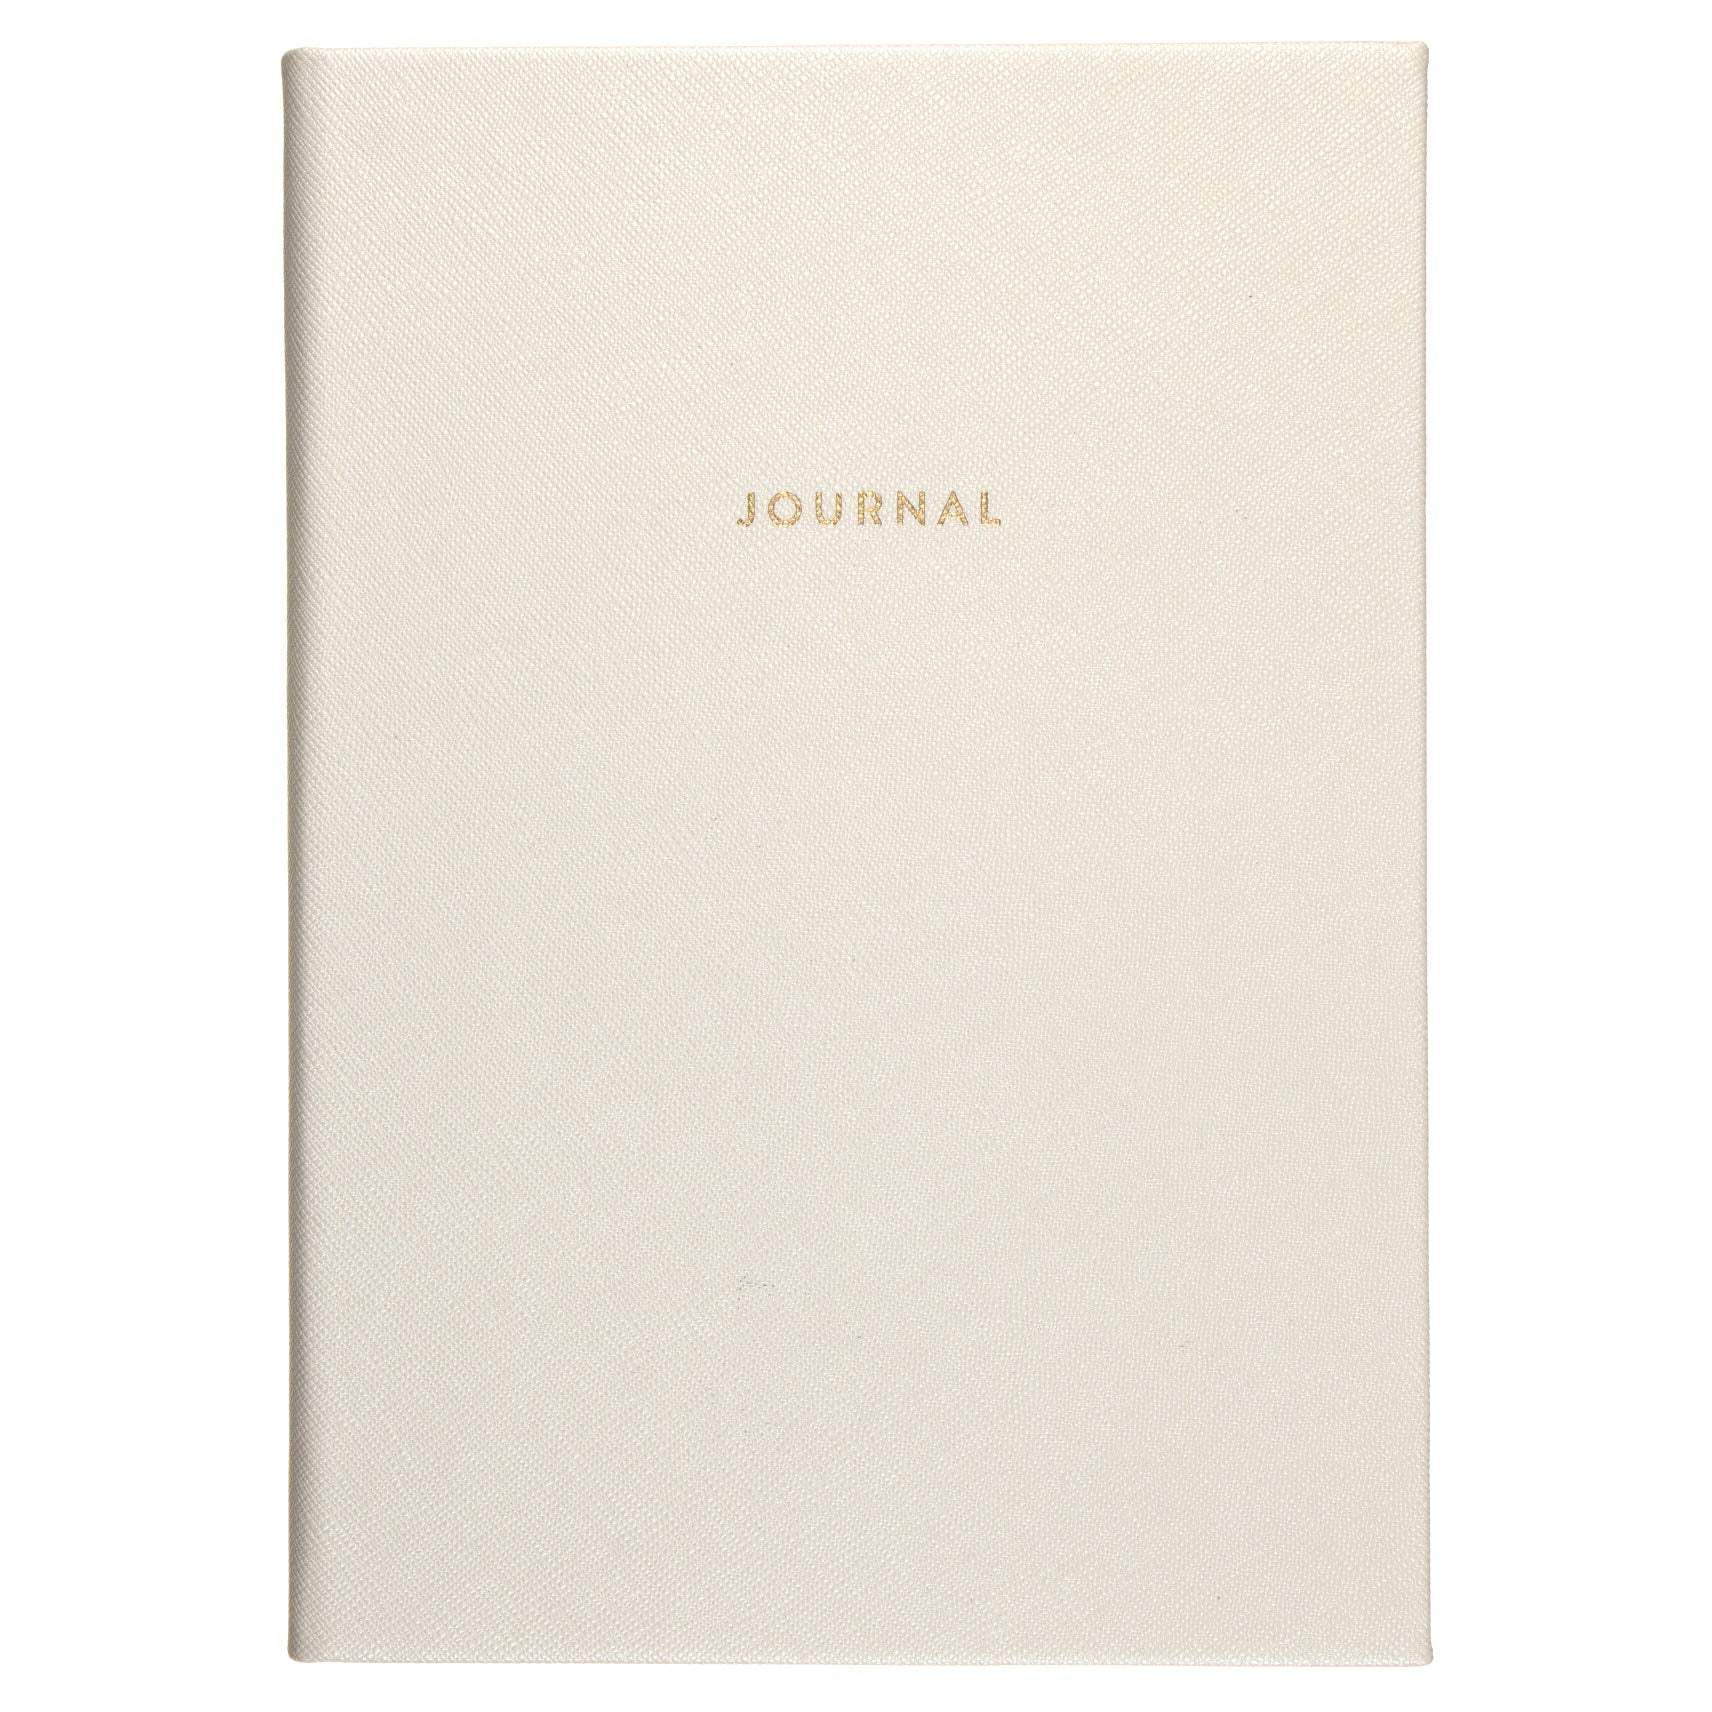 Eccolo Medium Lined Journal Notebook White